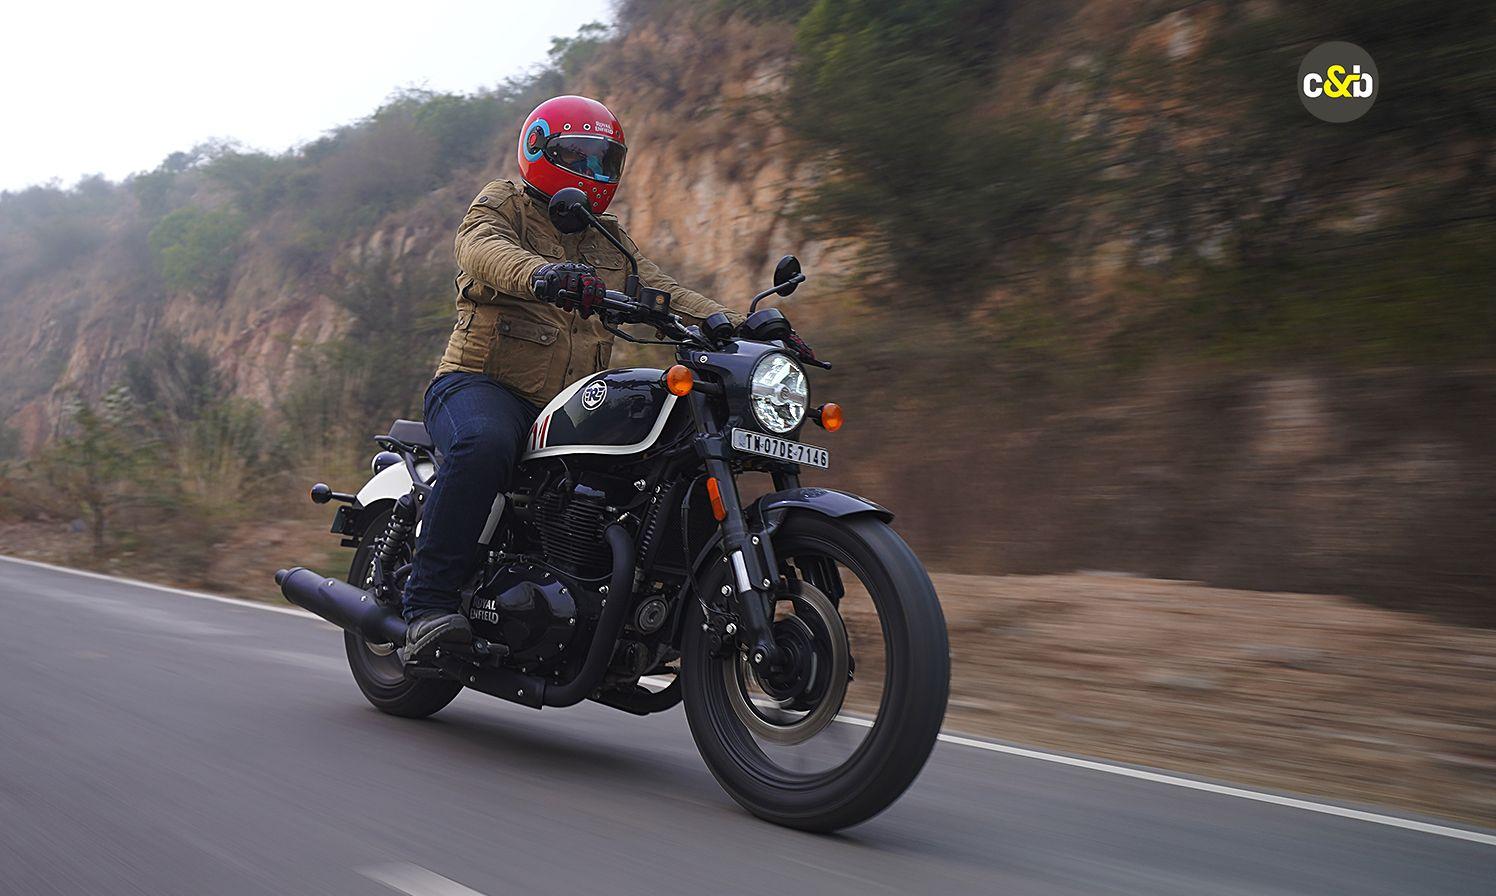 The Royal Enfield Shotgun 650 is a legit style statement but is it worth a buy? We find the answer to that question and much more in our first ride review of the latest 650 cc motorcycle from Royal Enfield.